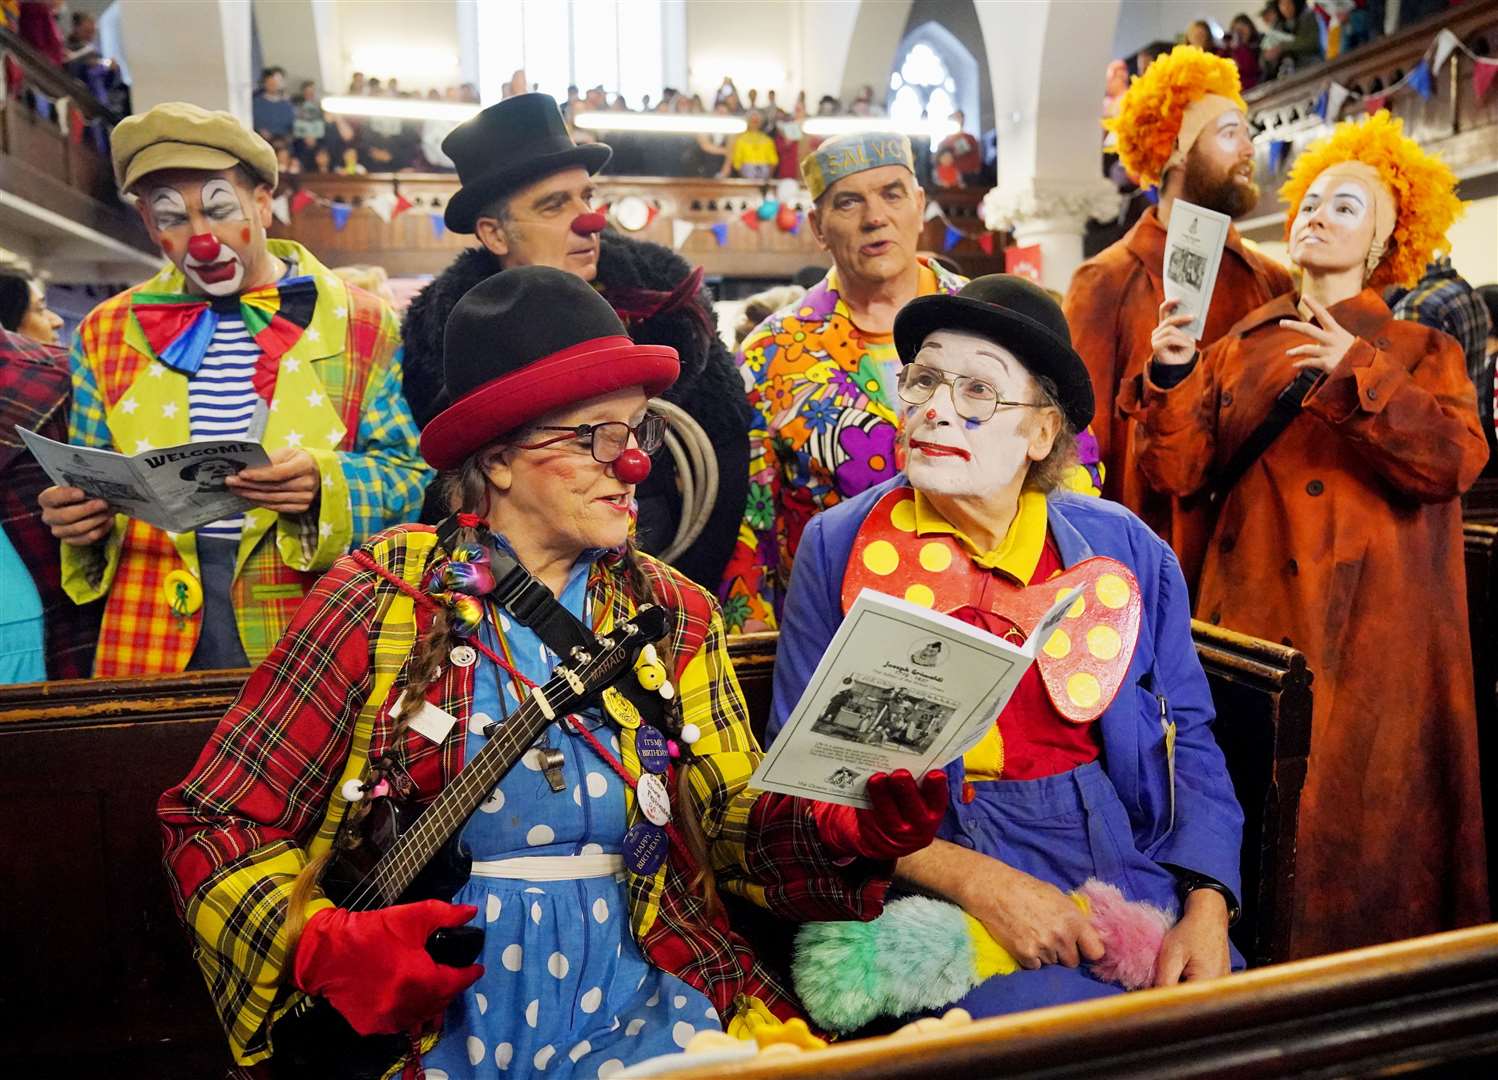 Many attendees donned bright clothing (Jonathan Brady/PA)